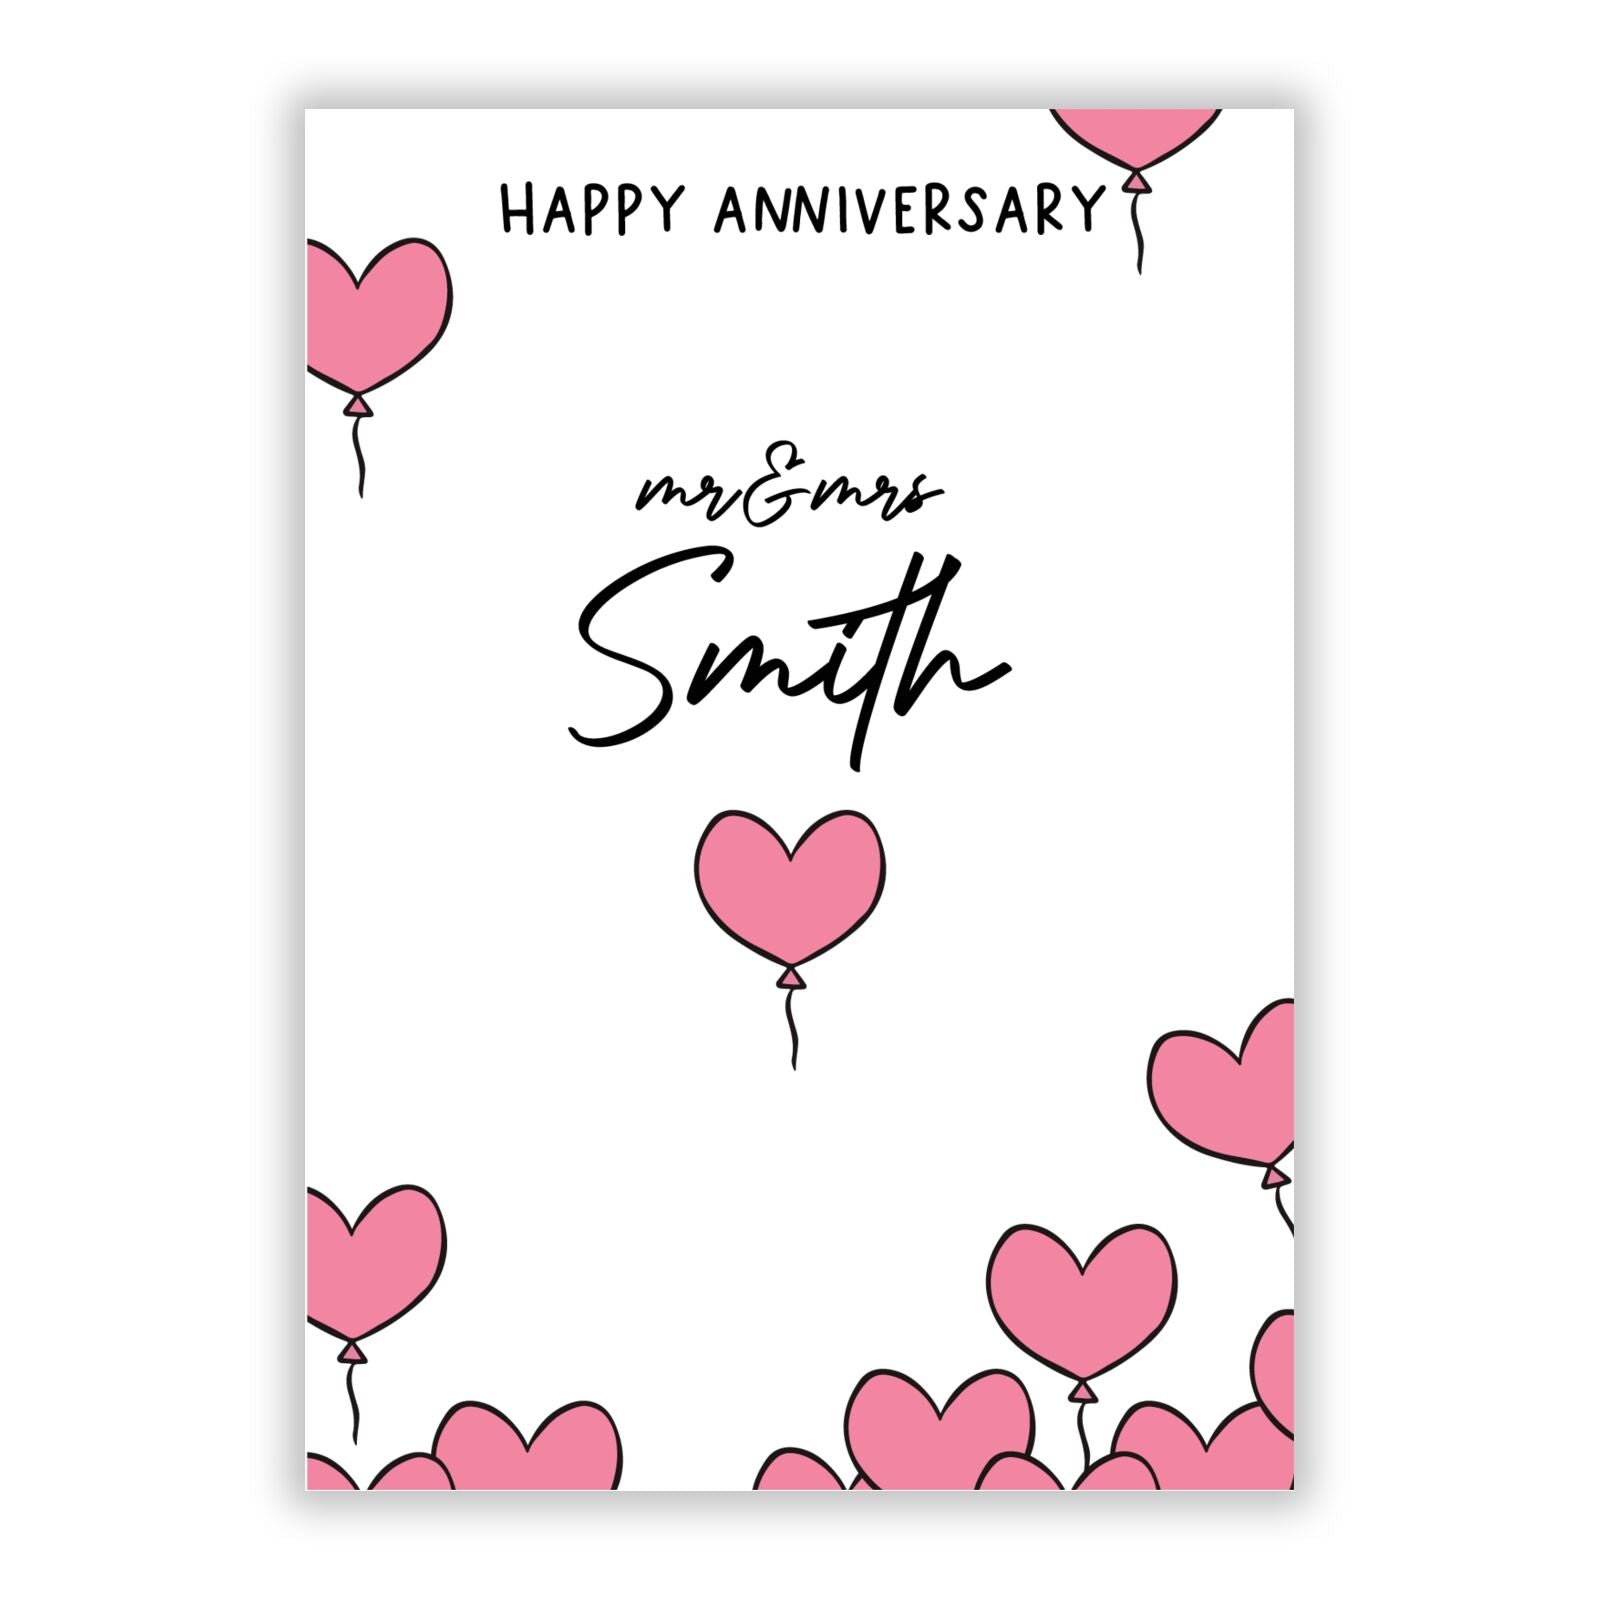 Personalised Anniversary Heart Balloons A5 Flat Greetings Card